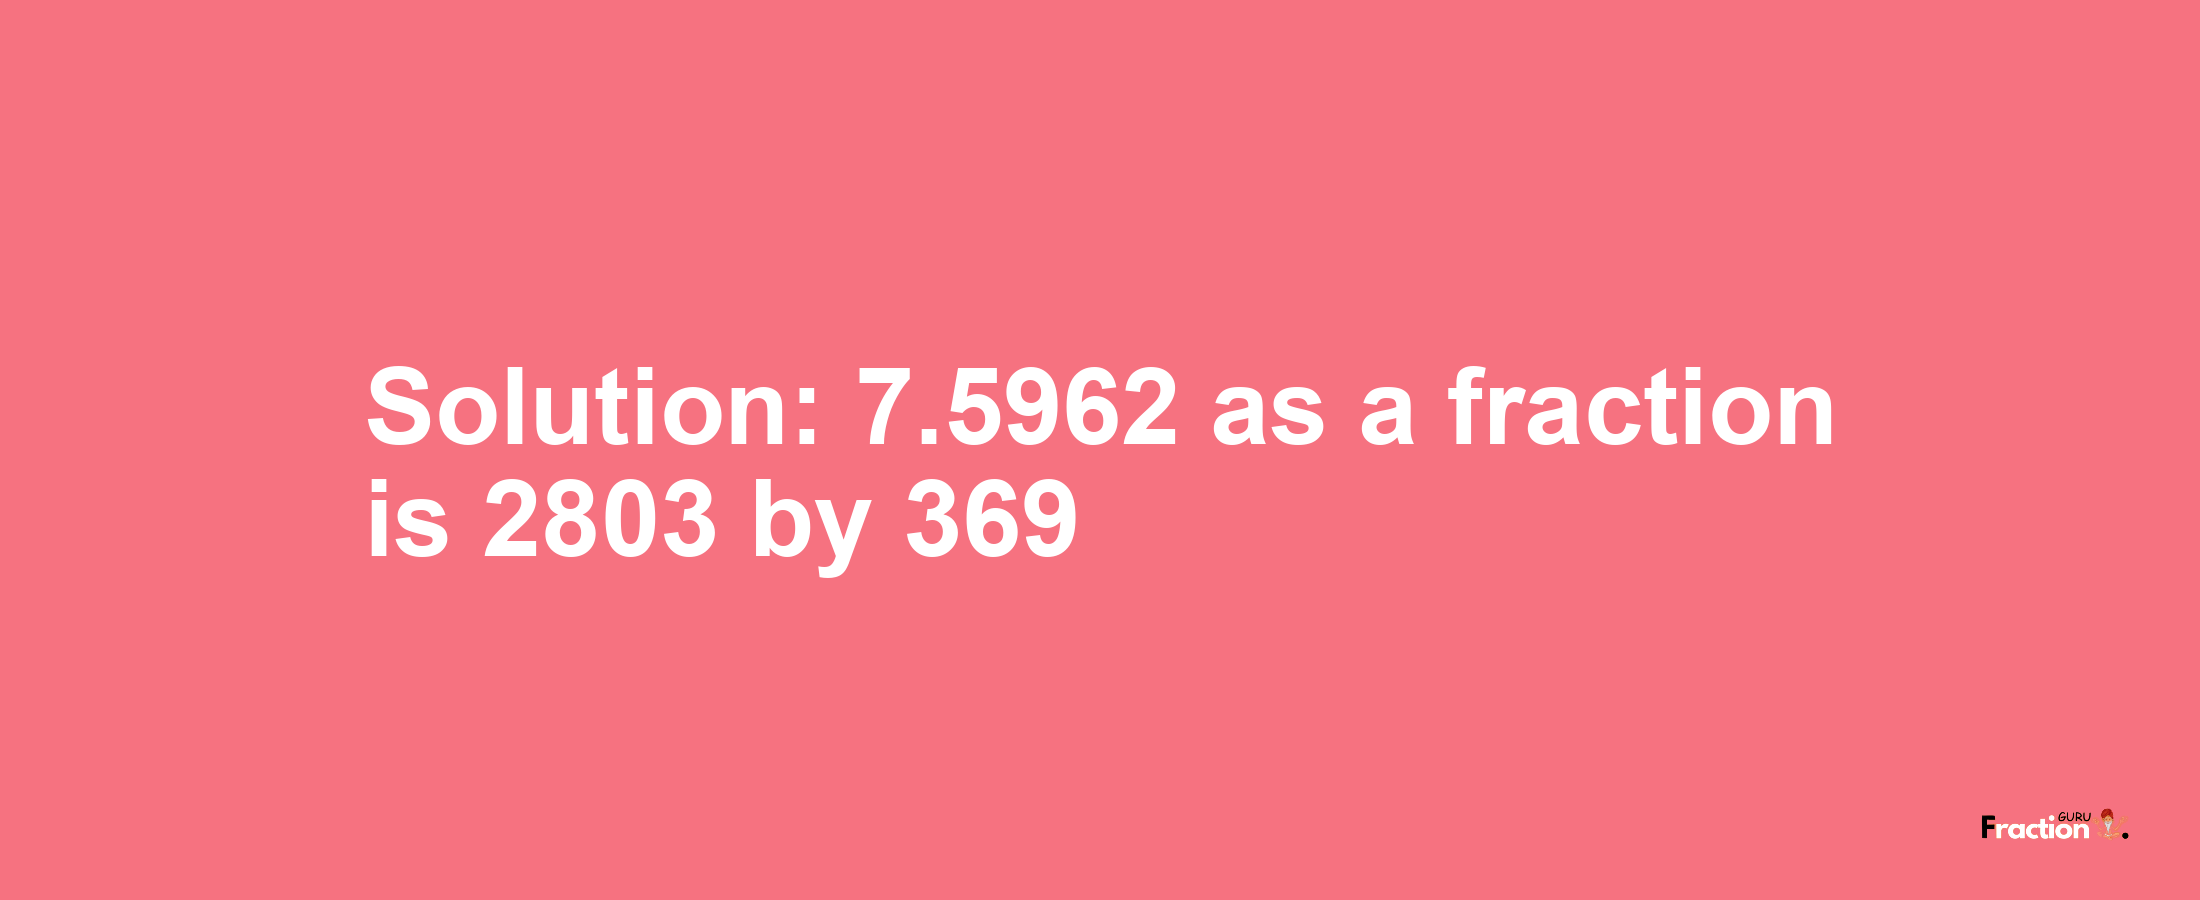 Solution:7.5962 as a fraction is 2803/369